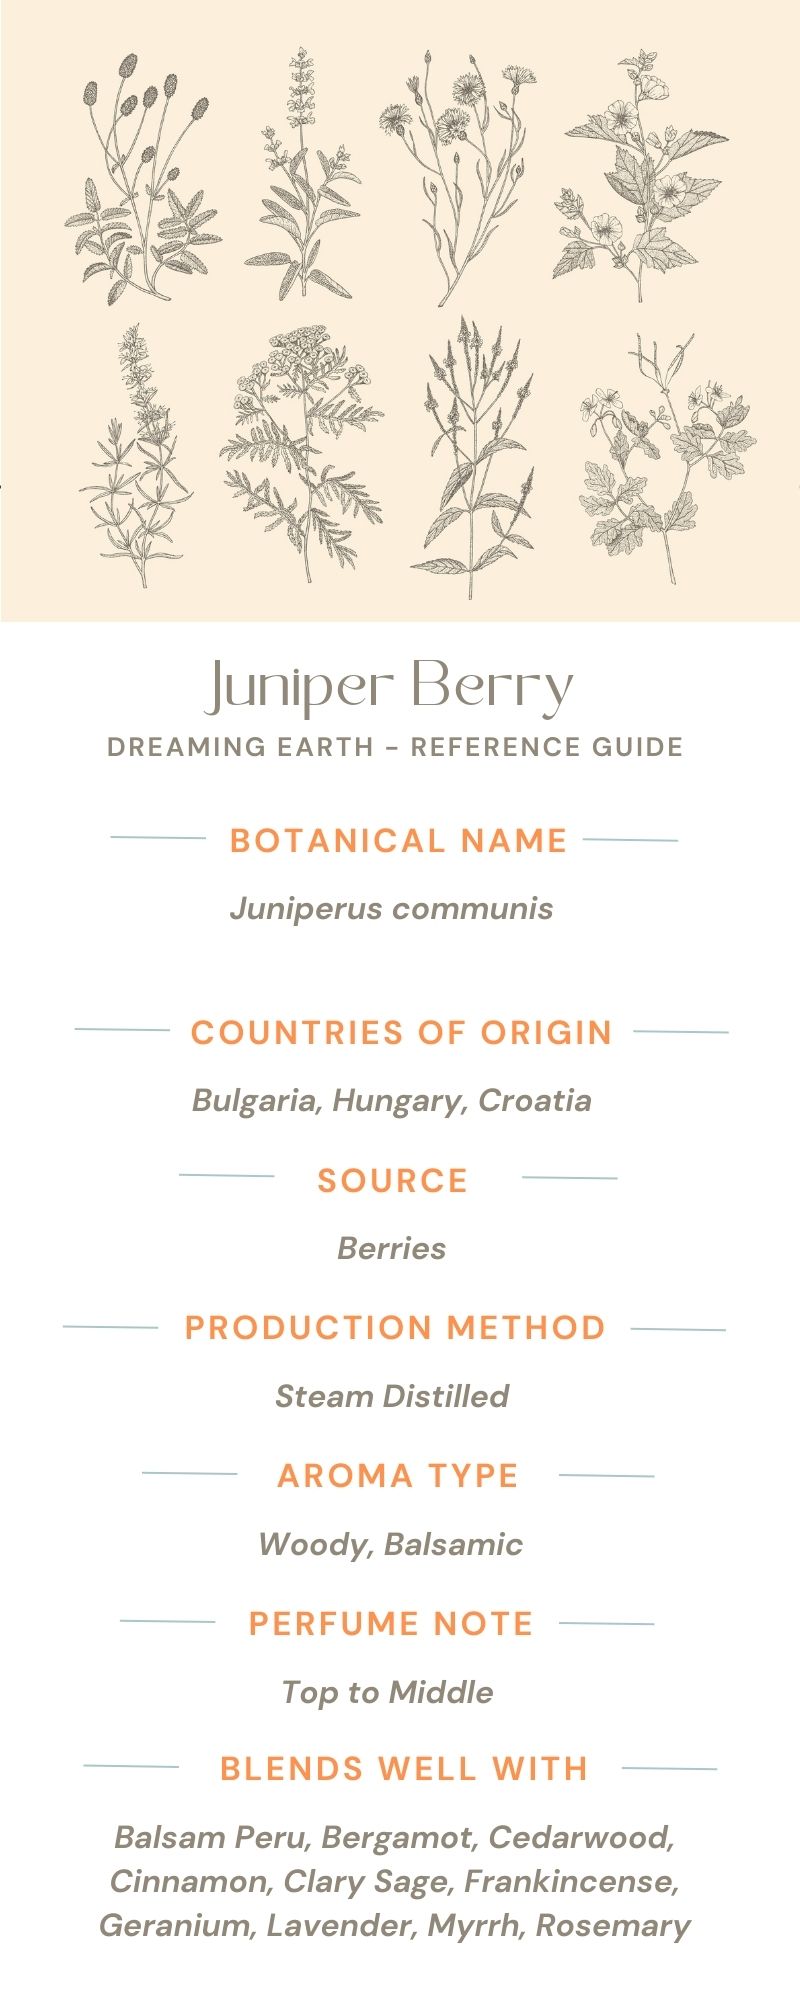 Load image into Gallery viewer, Juniper Berry Essential Oil - Dreaming Earth Inc
